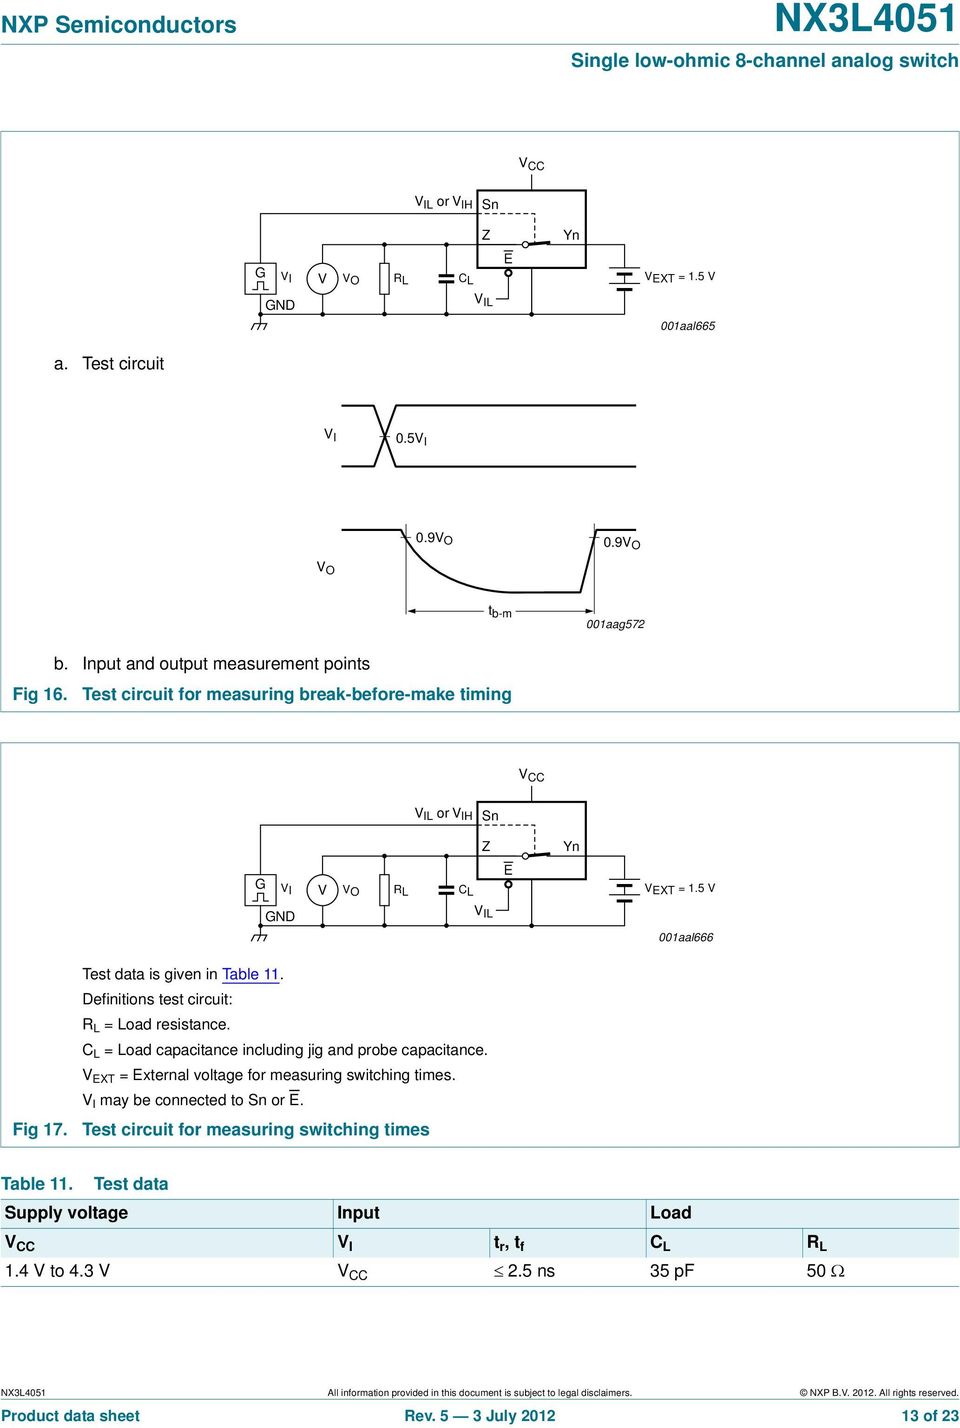 Test data is given in Table 11. Definitions test circuit: R L = Load resistance. C L = Load capacitance including jig and probe capacitance. V XT = xternal voltage for measuring switching times.